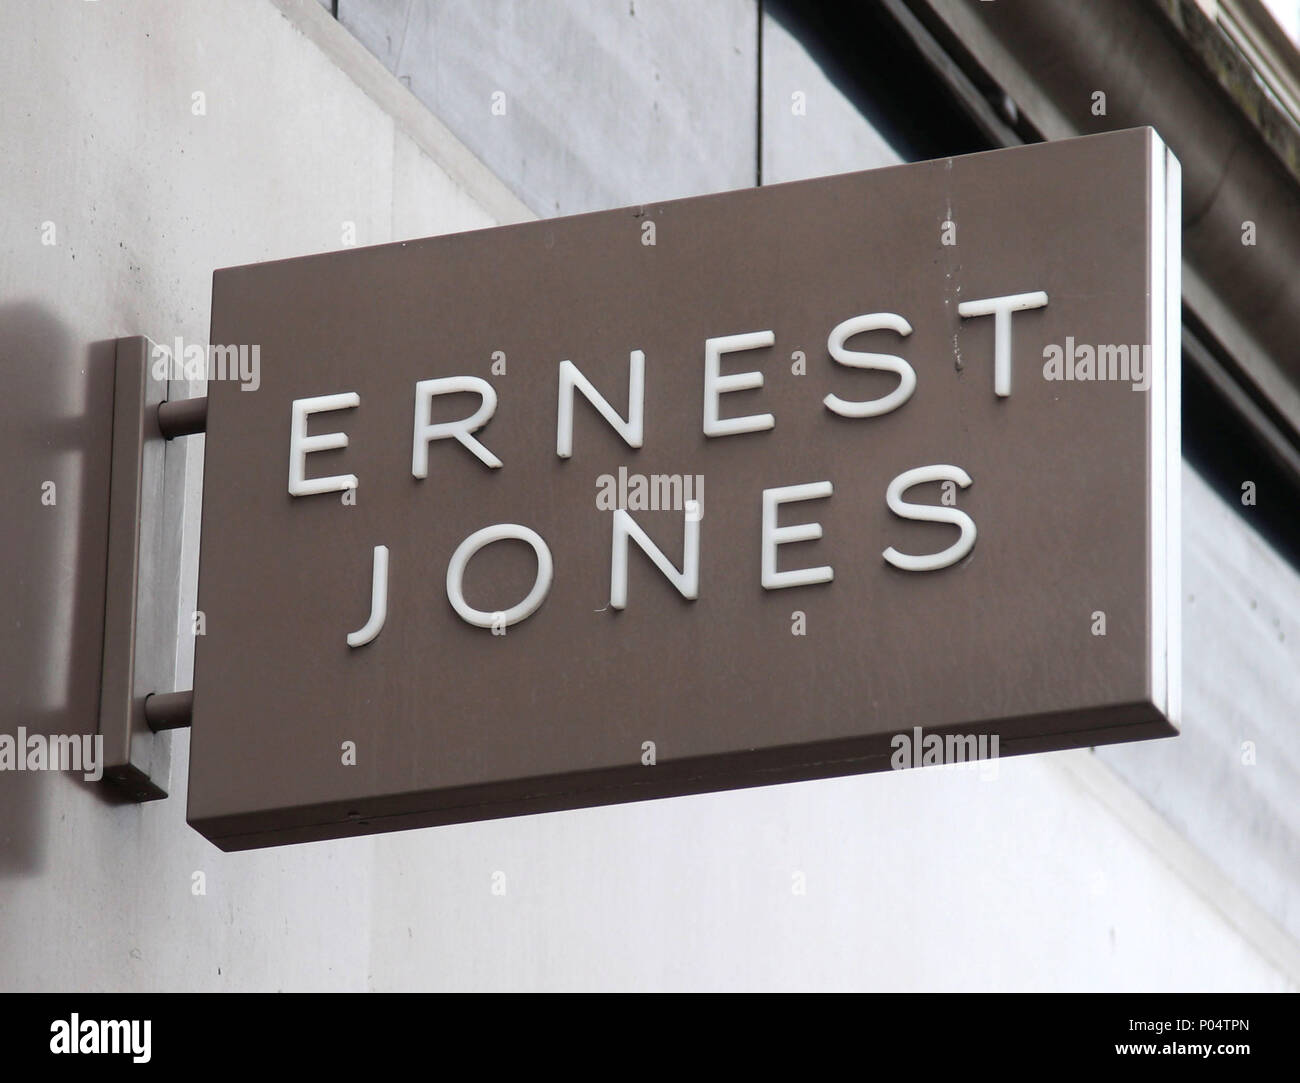 A branch of Ernest Jones on Oxford Street, central London. Stock Photo